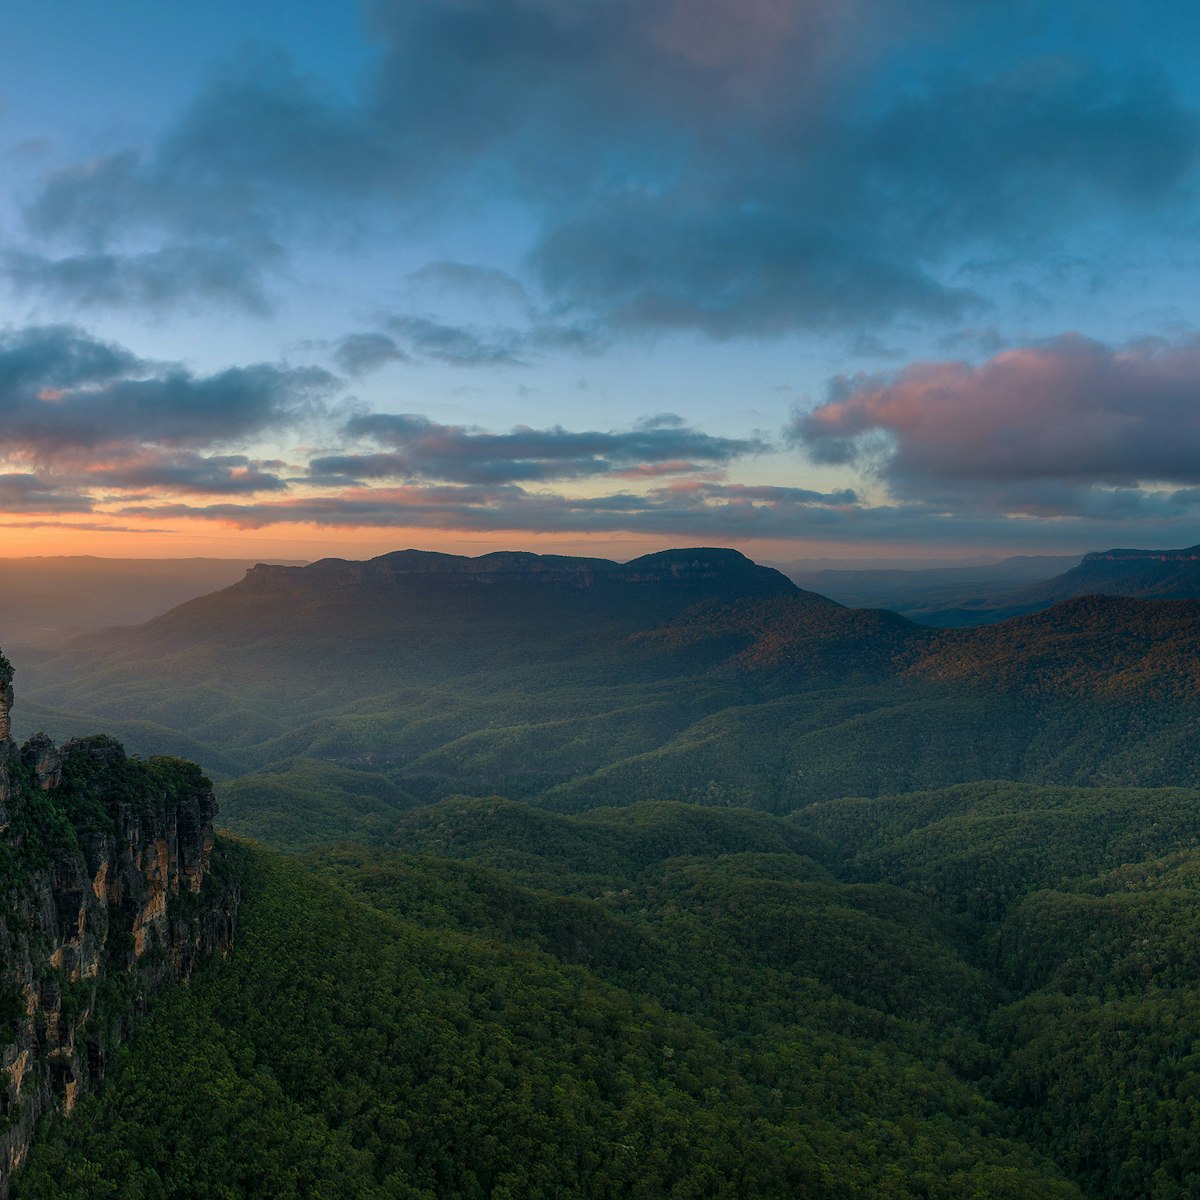 Landscape with forest and mountains at sunset, Katoomba, Australia